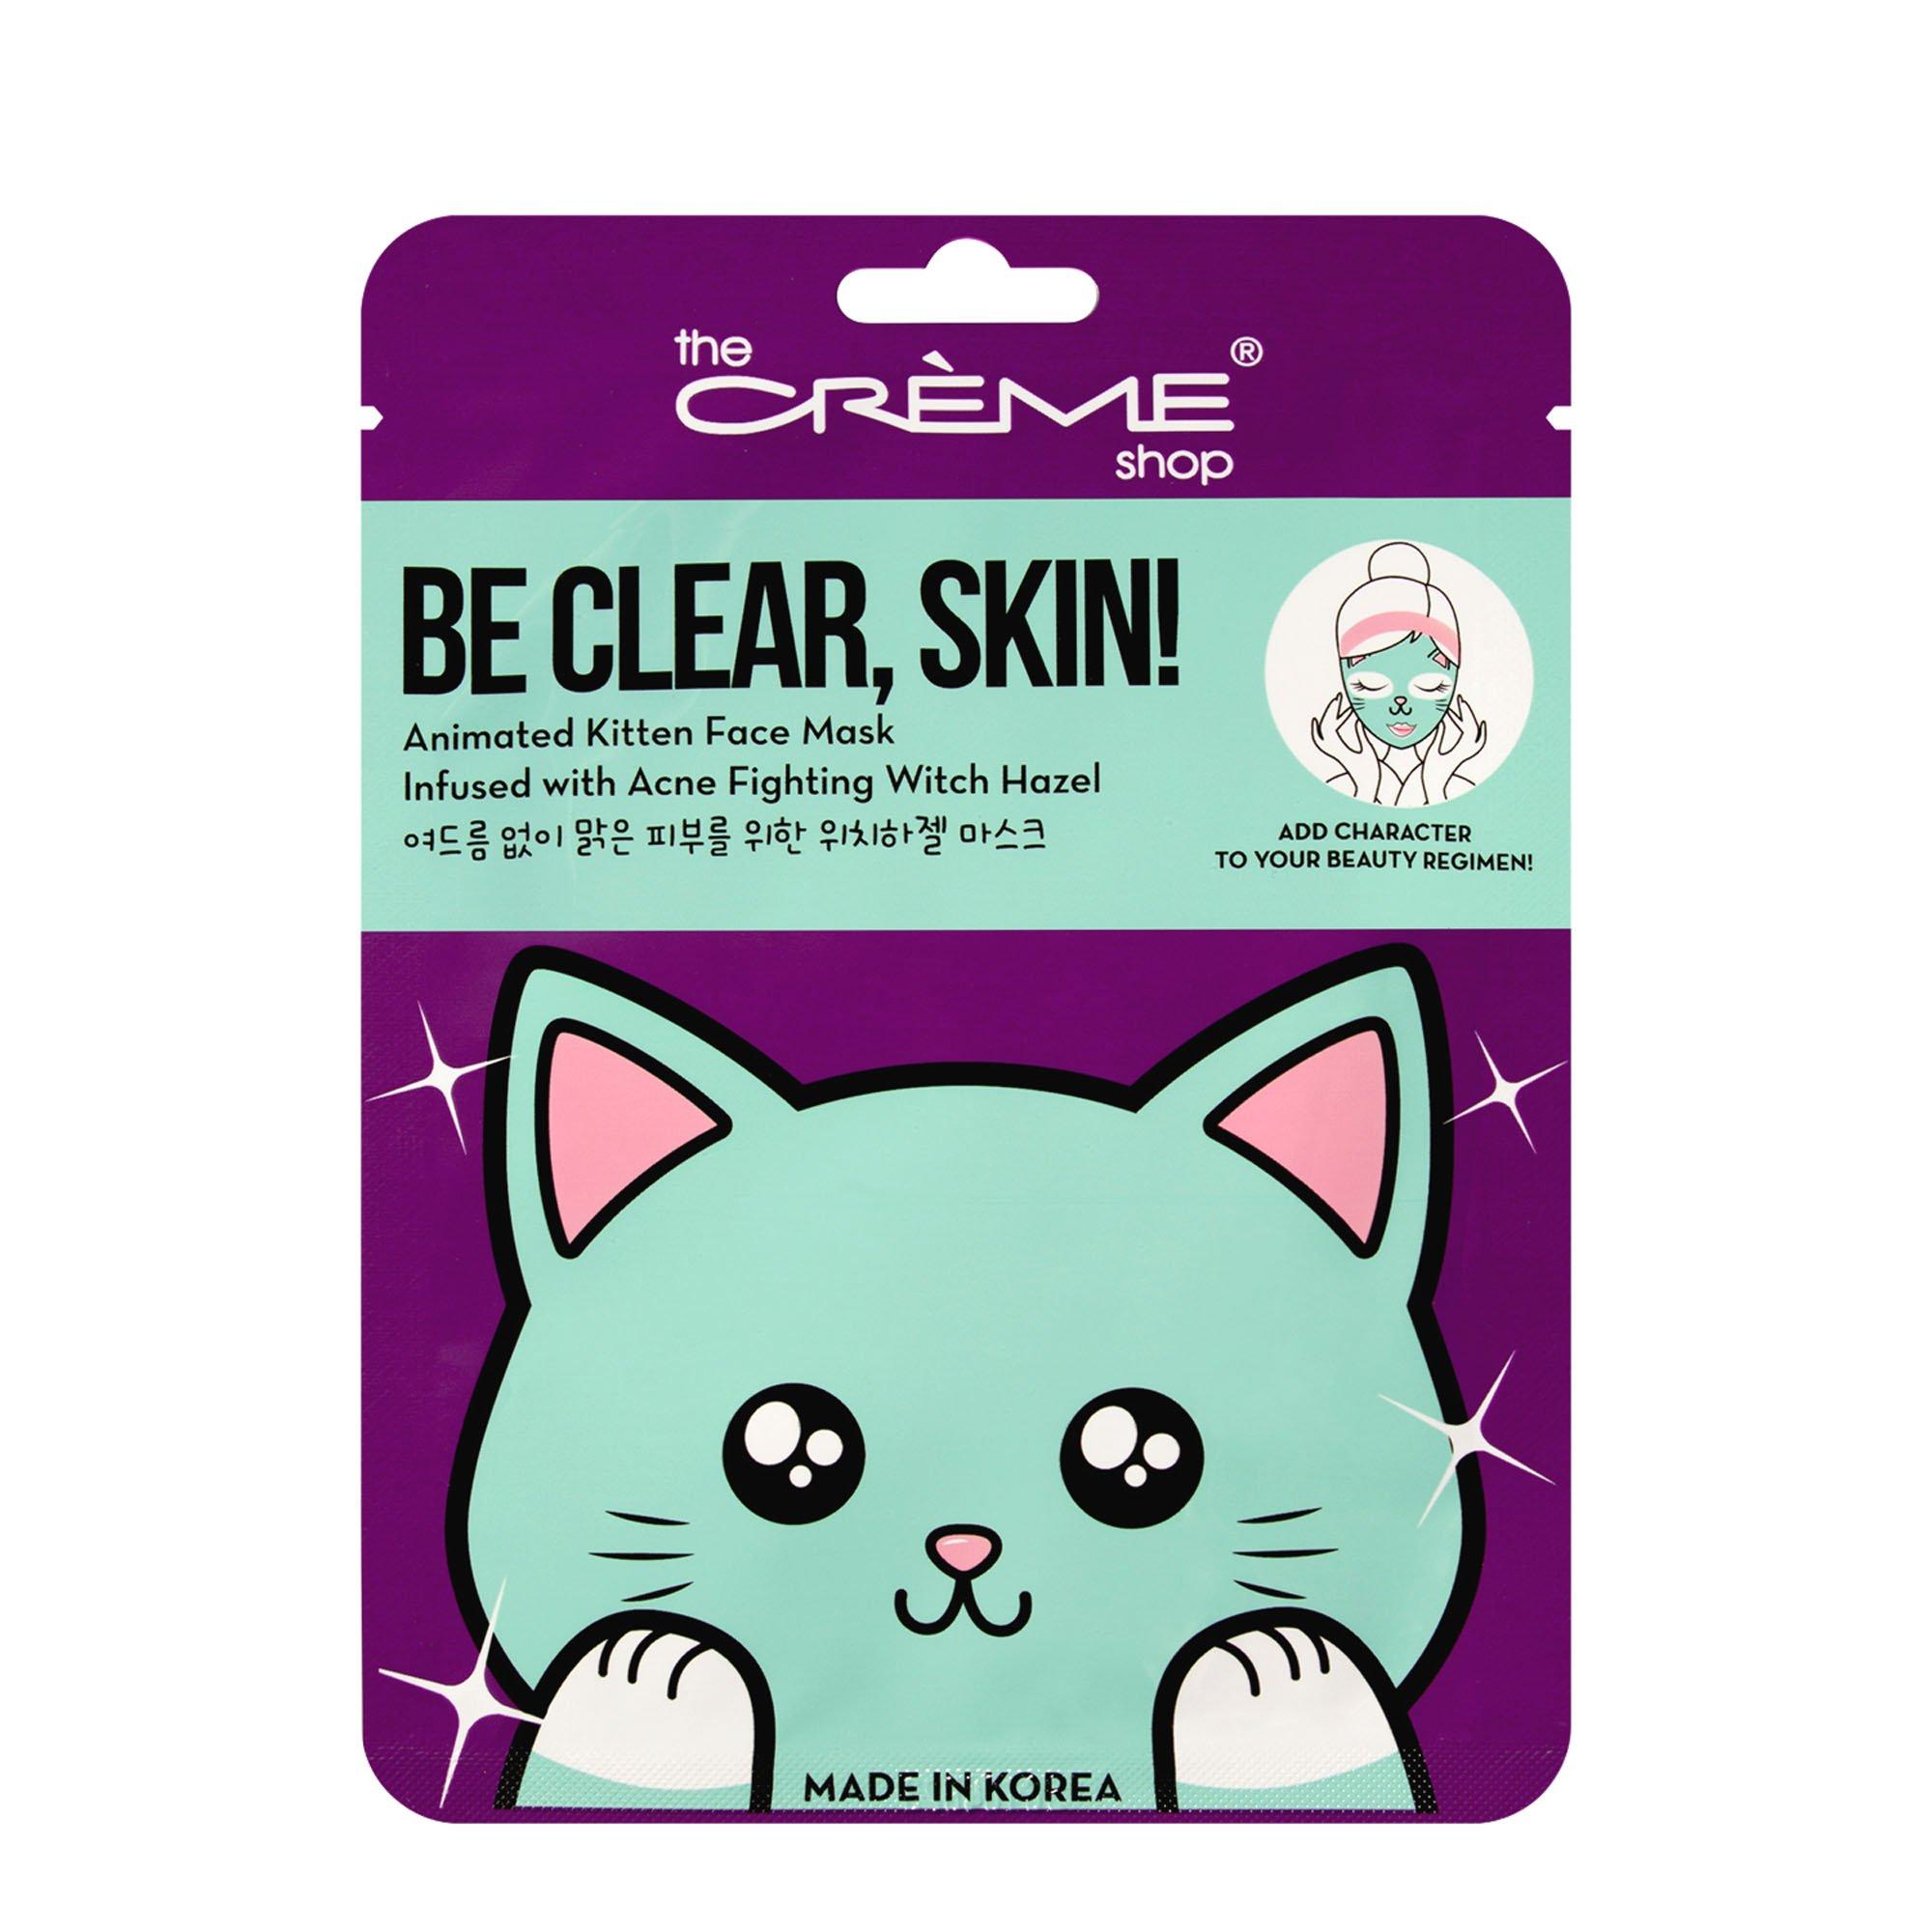 Be Clear, Skin! Animated Kitten Face Mask - Acne Fighting Witch Hazel